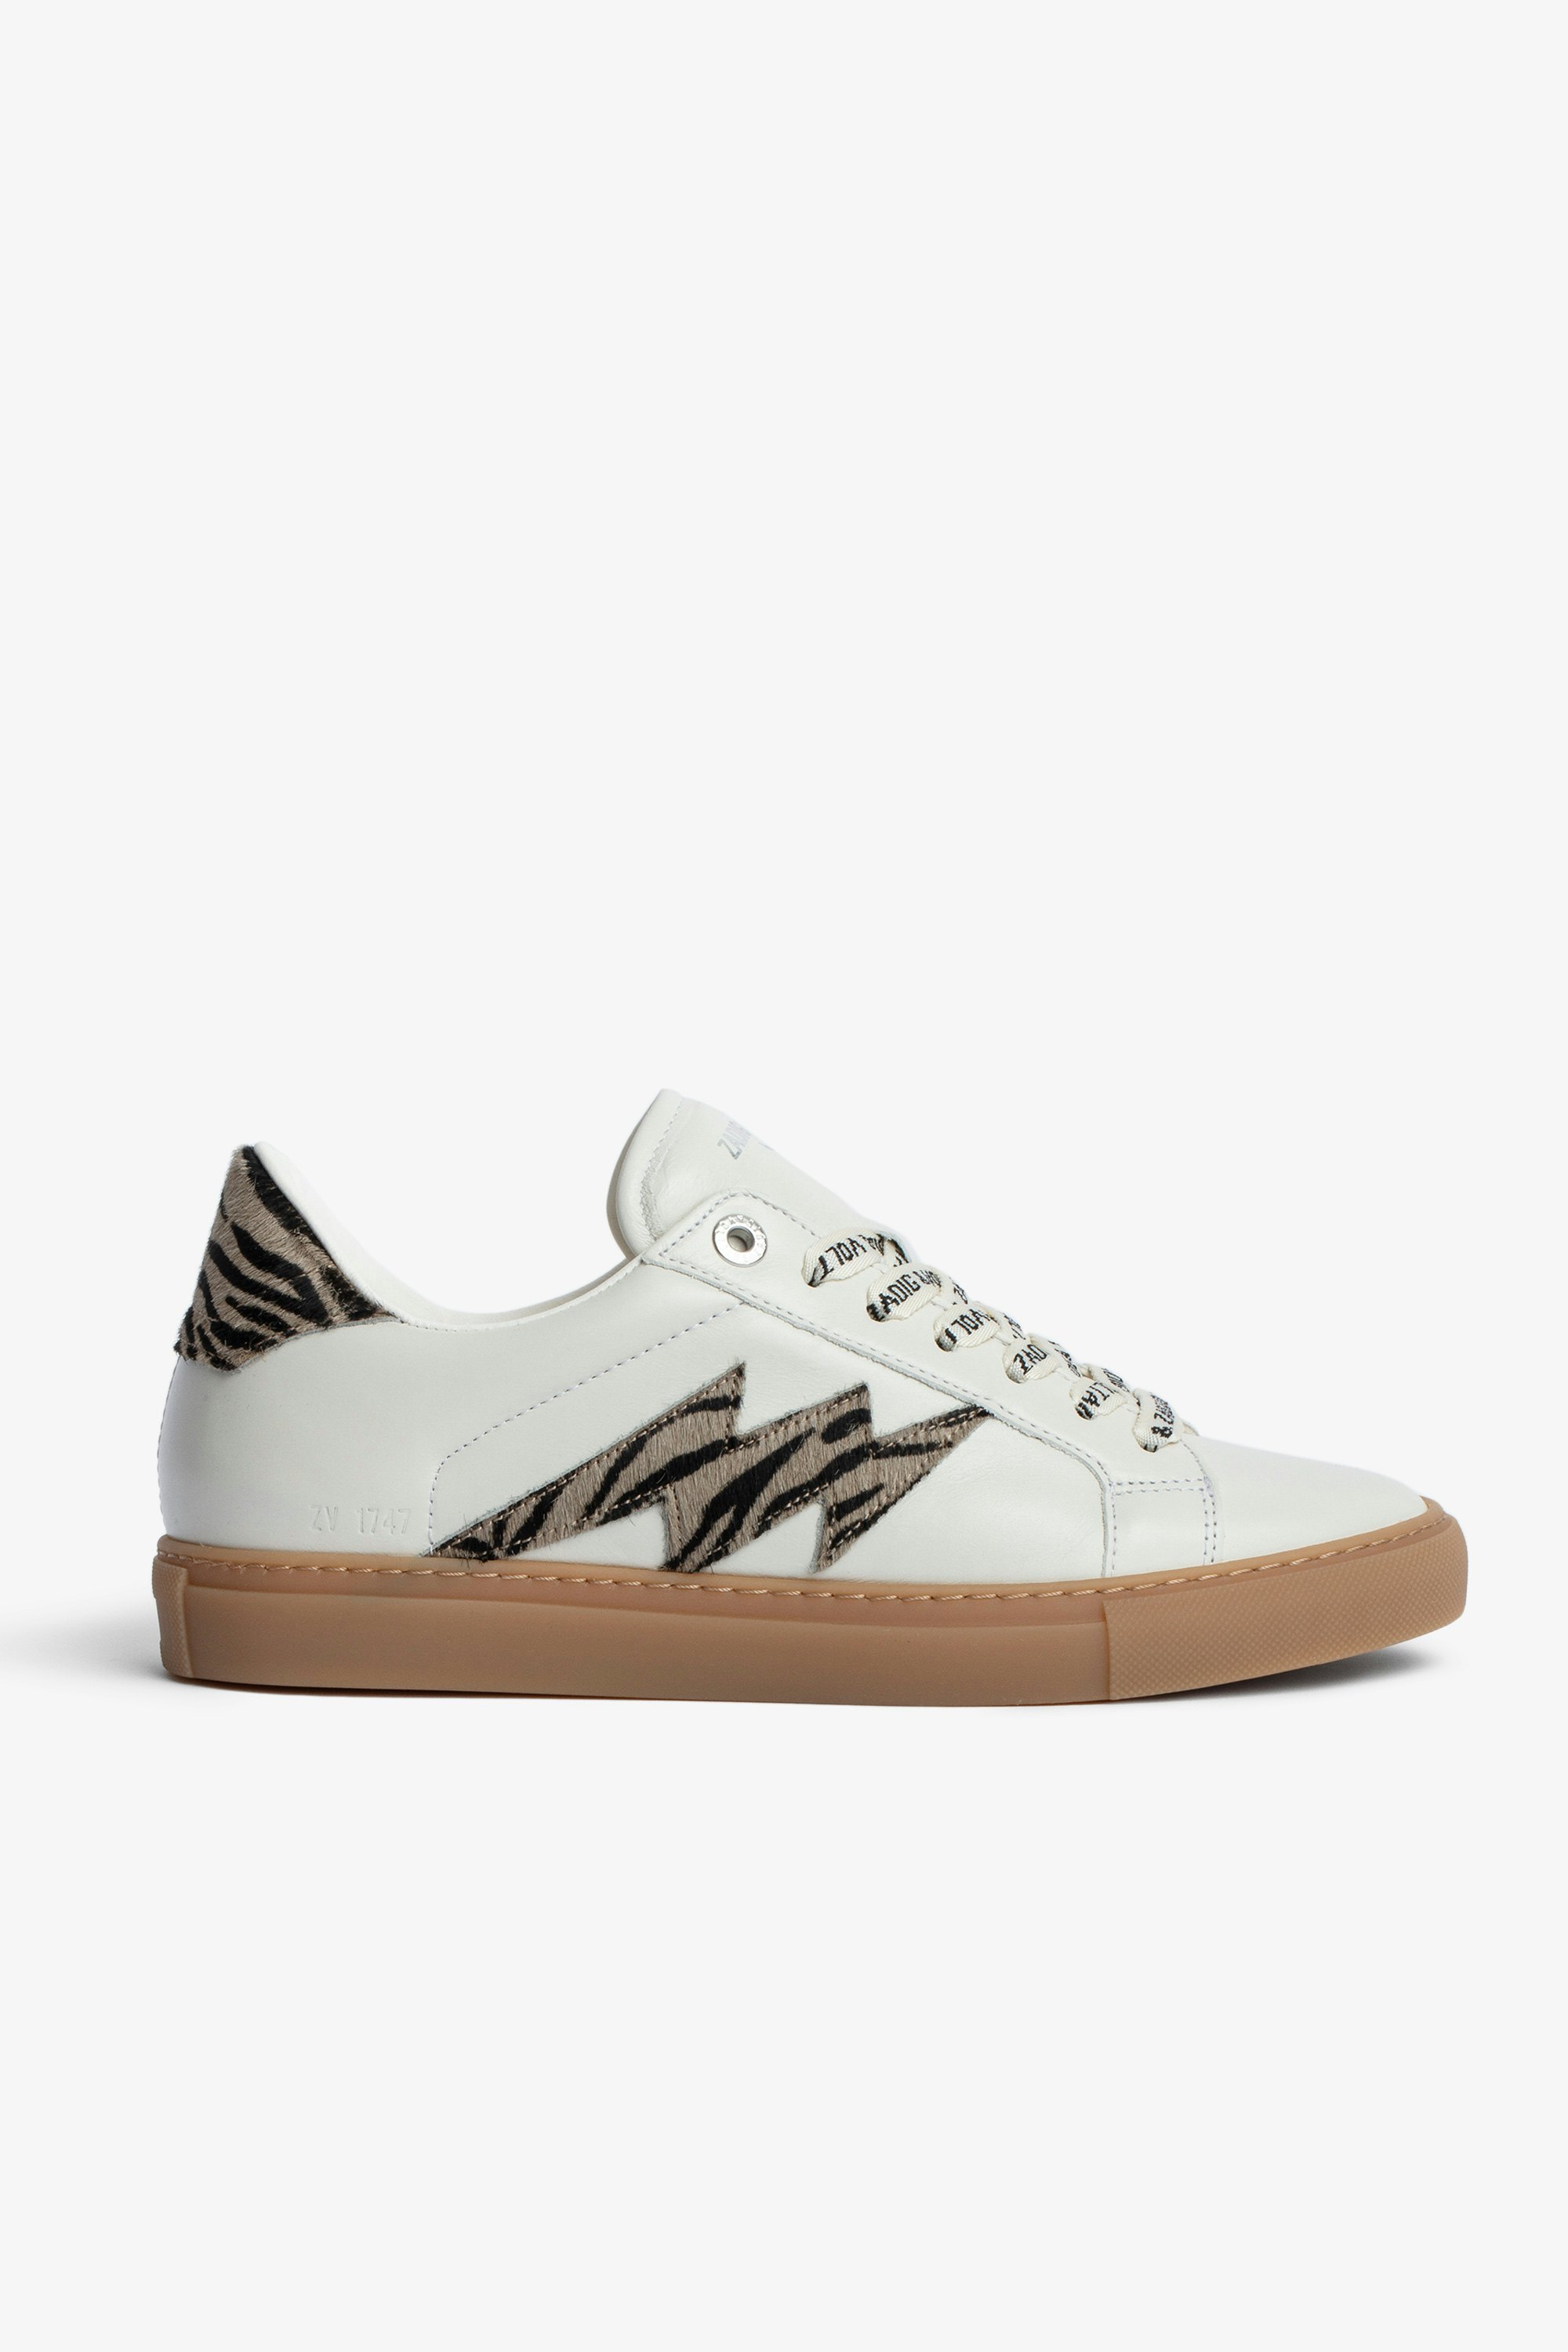 ZV1747 Sneakers Women’s white leather low-top sneakers with zebra-print panels